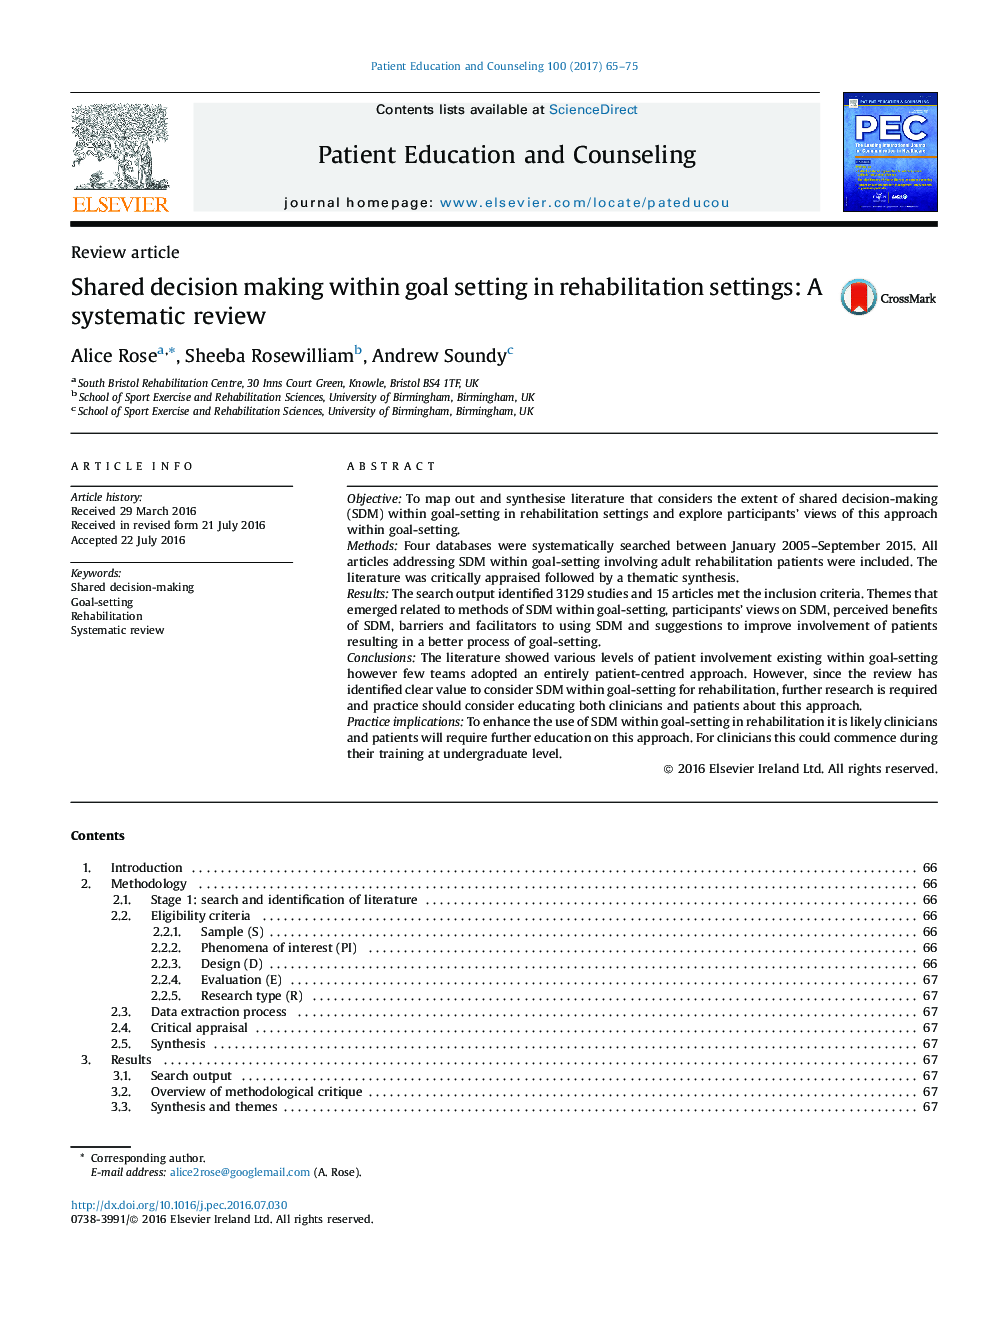 Shared decision making within goal setting in rehabilitation settings: A systematic review